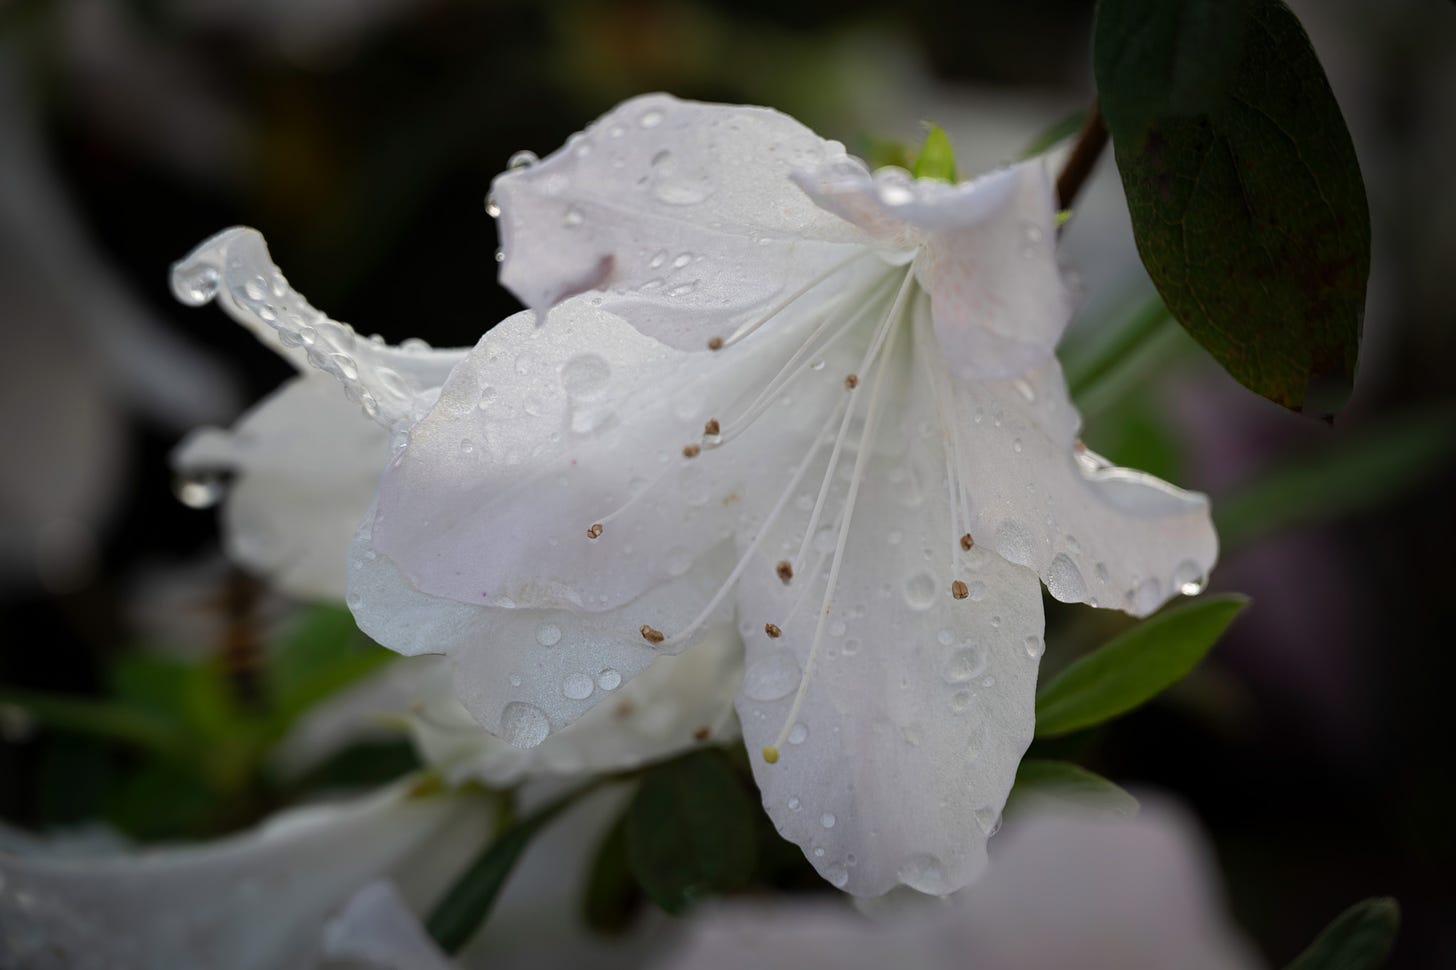 A single white azalea with morning dew drops hanging into the petals.